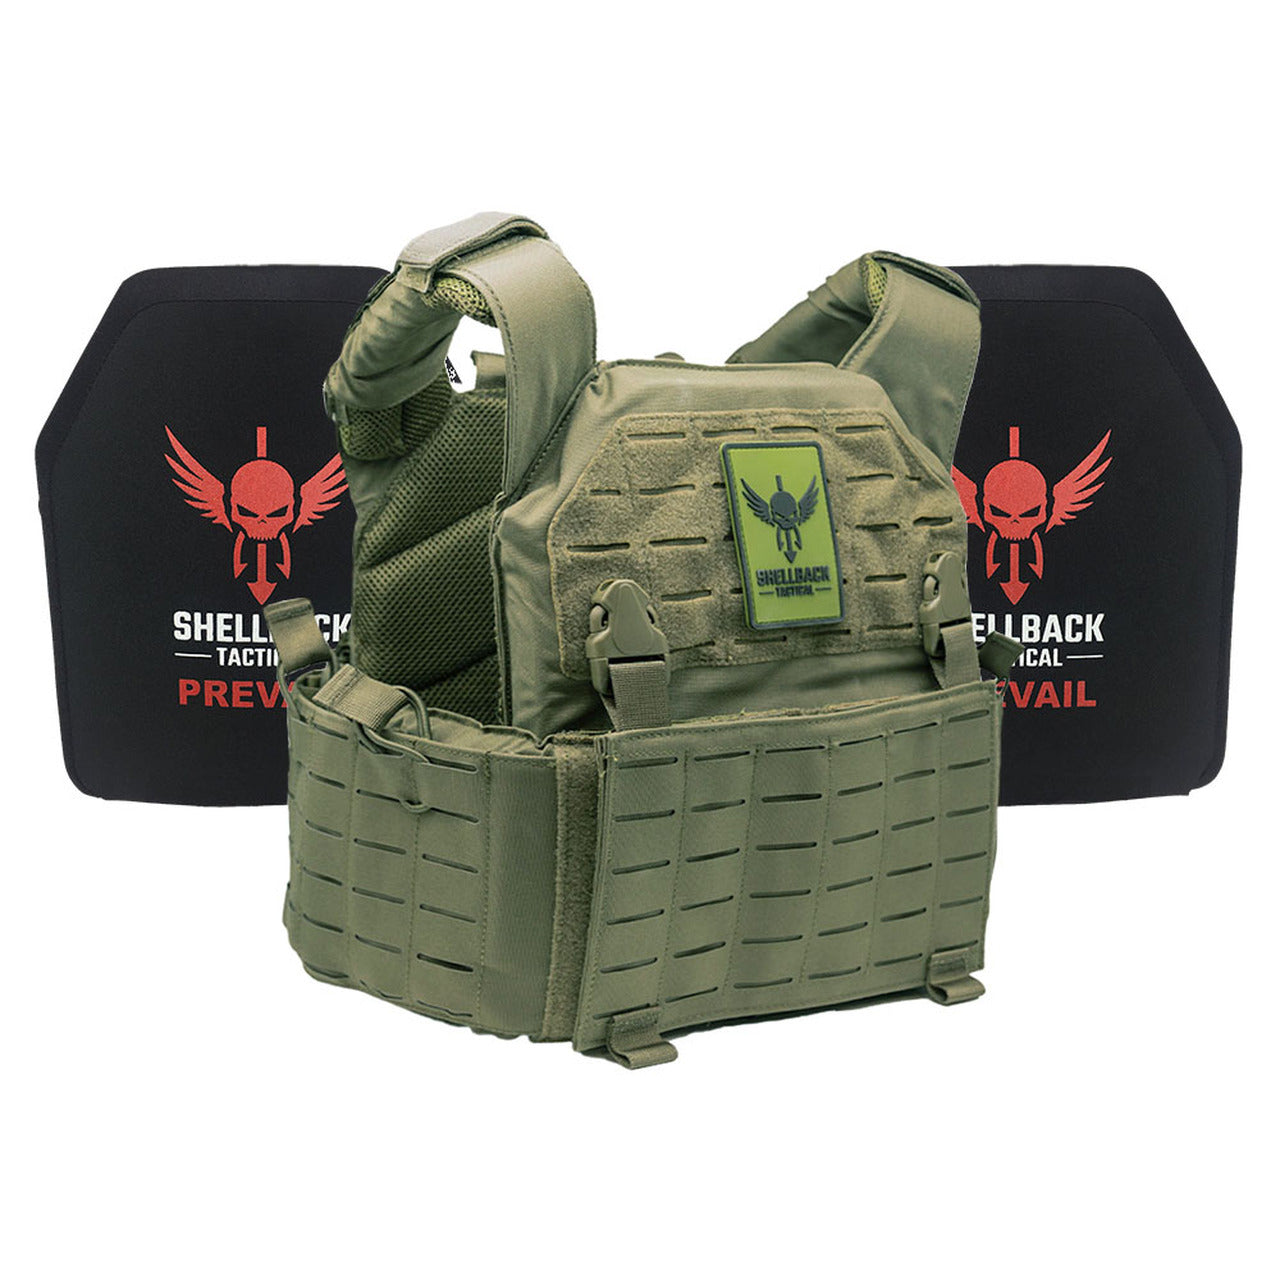 A Shellback Tactical Rampage 2.0 Active Shooter Kit with Level III Single Curve 10 x 12 Hard Armor plate carrier with a red and black logo.